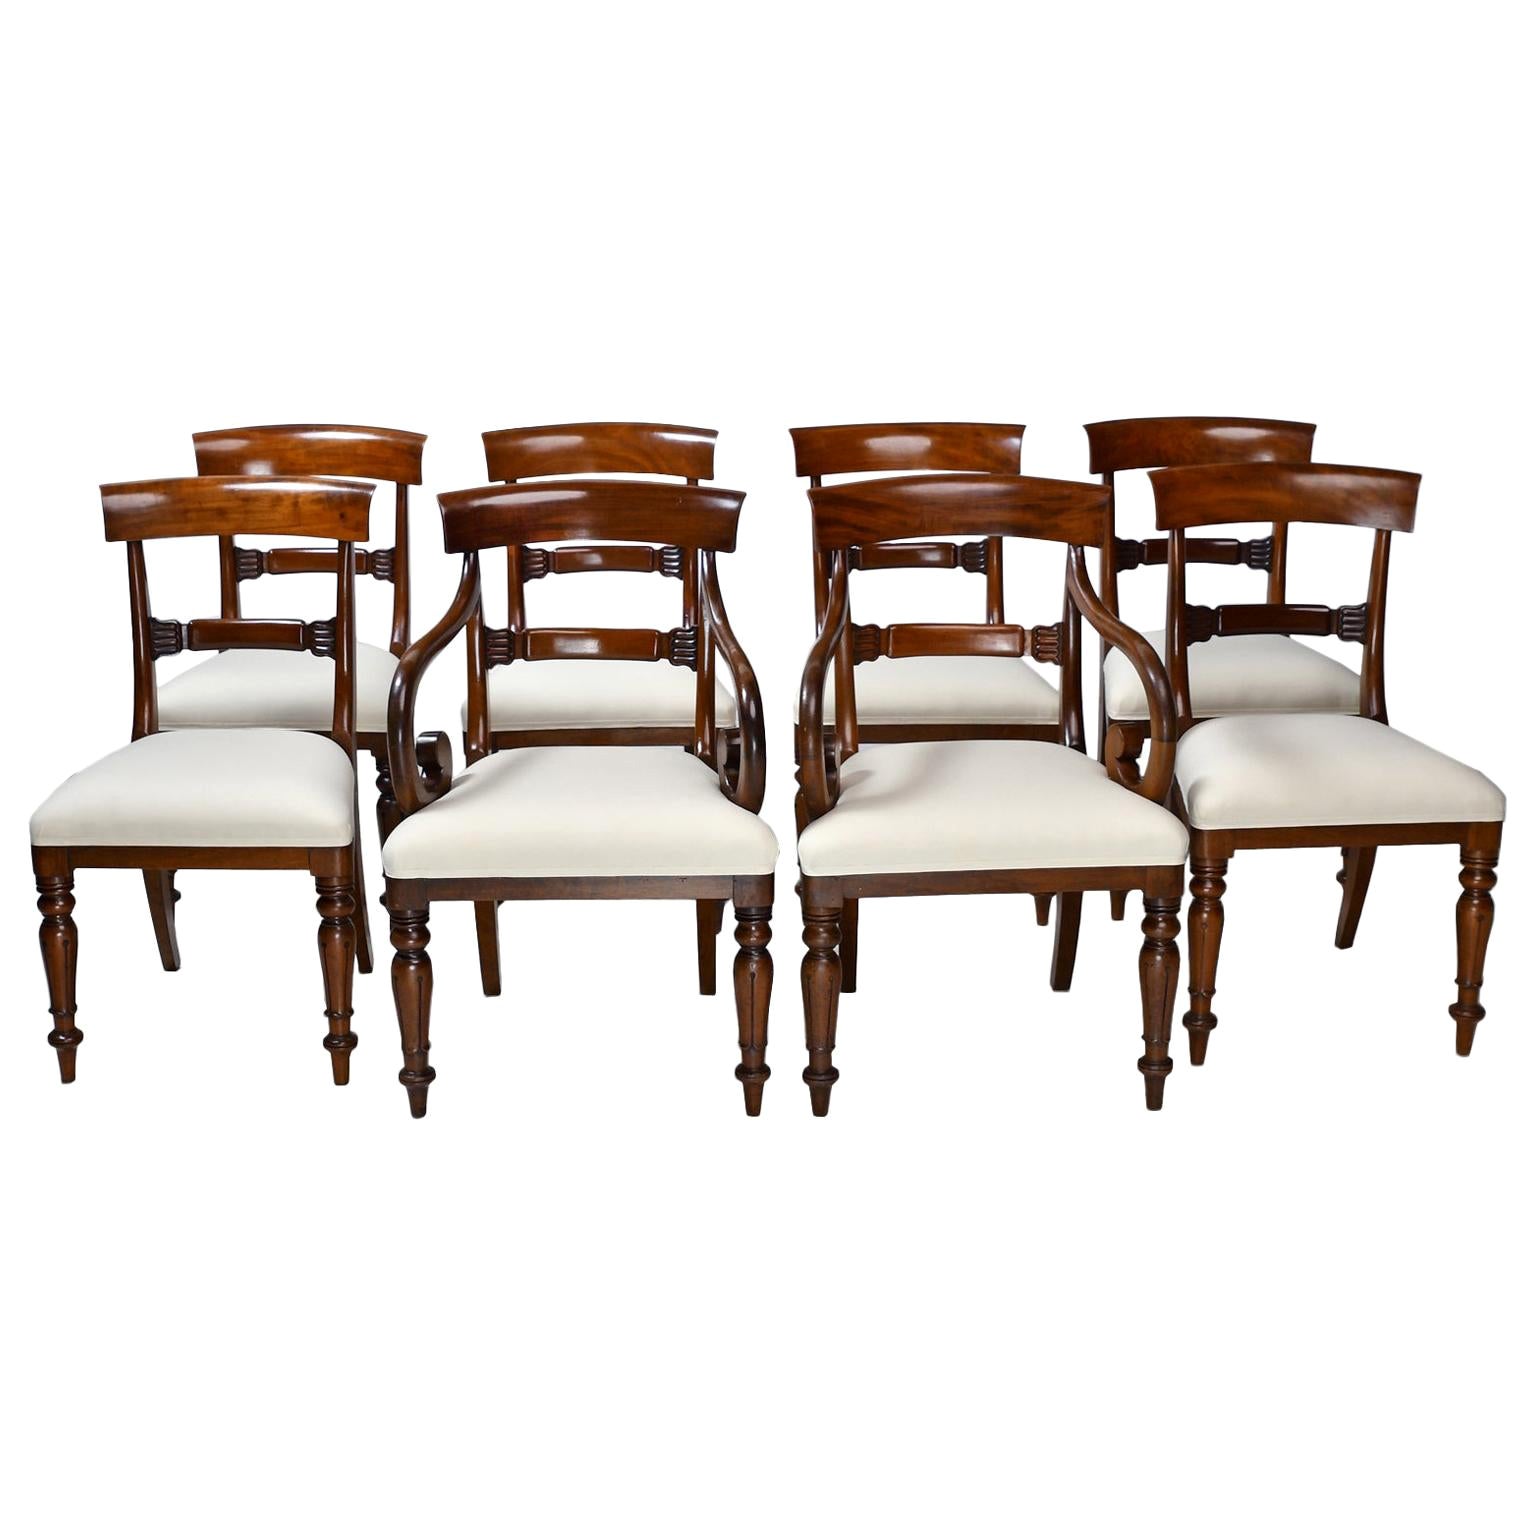 Set of 8 William IV Antique English Dining Chairs in Mahogany w 2 Arms & 6 Sides For Sale